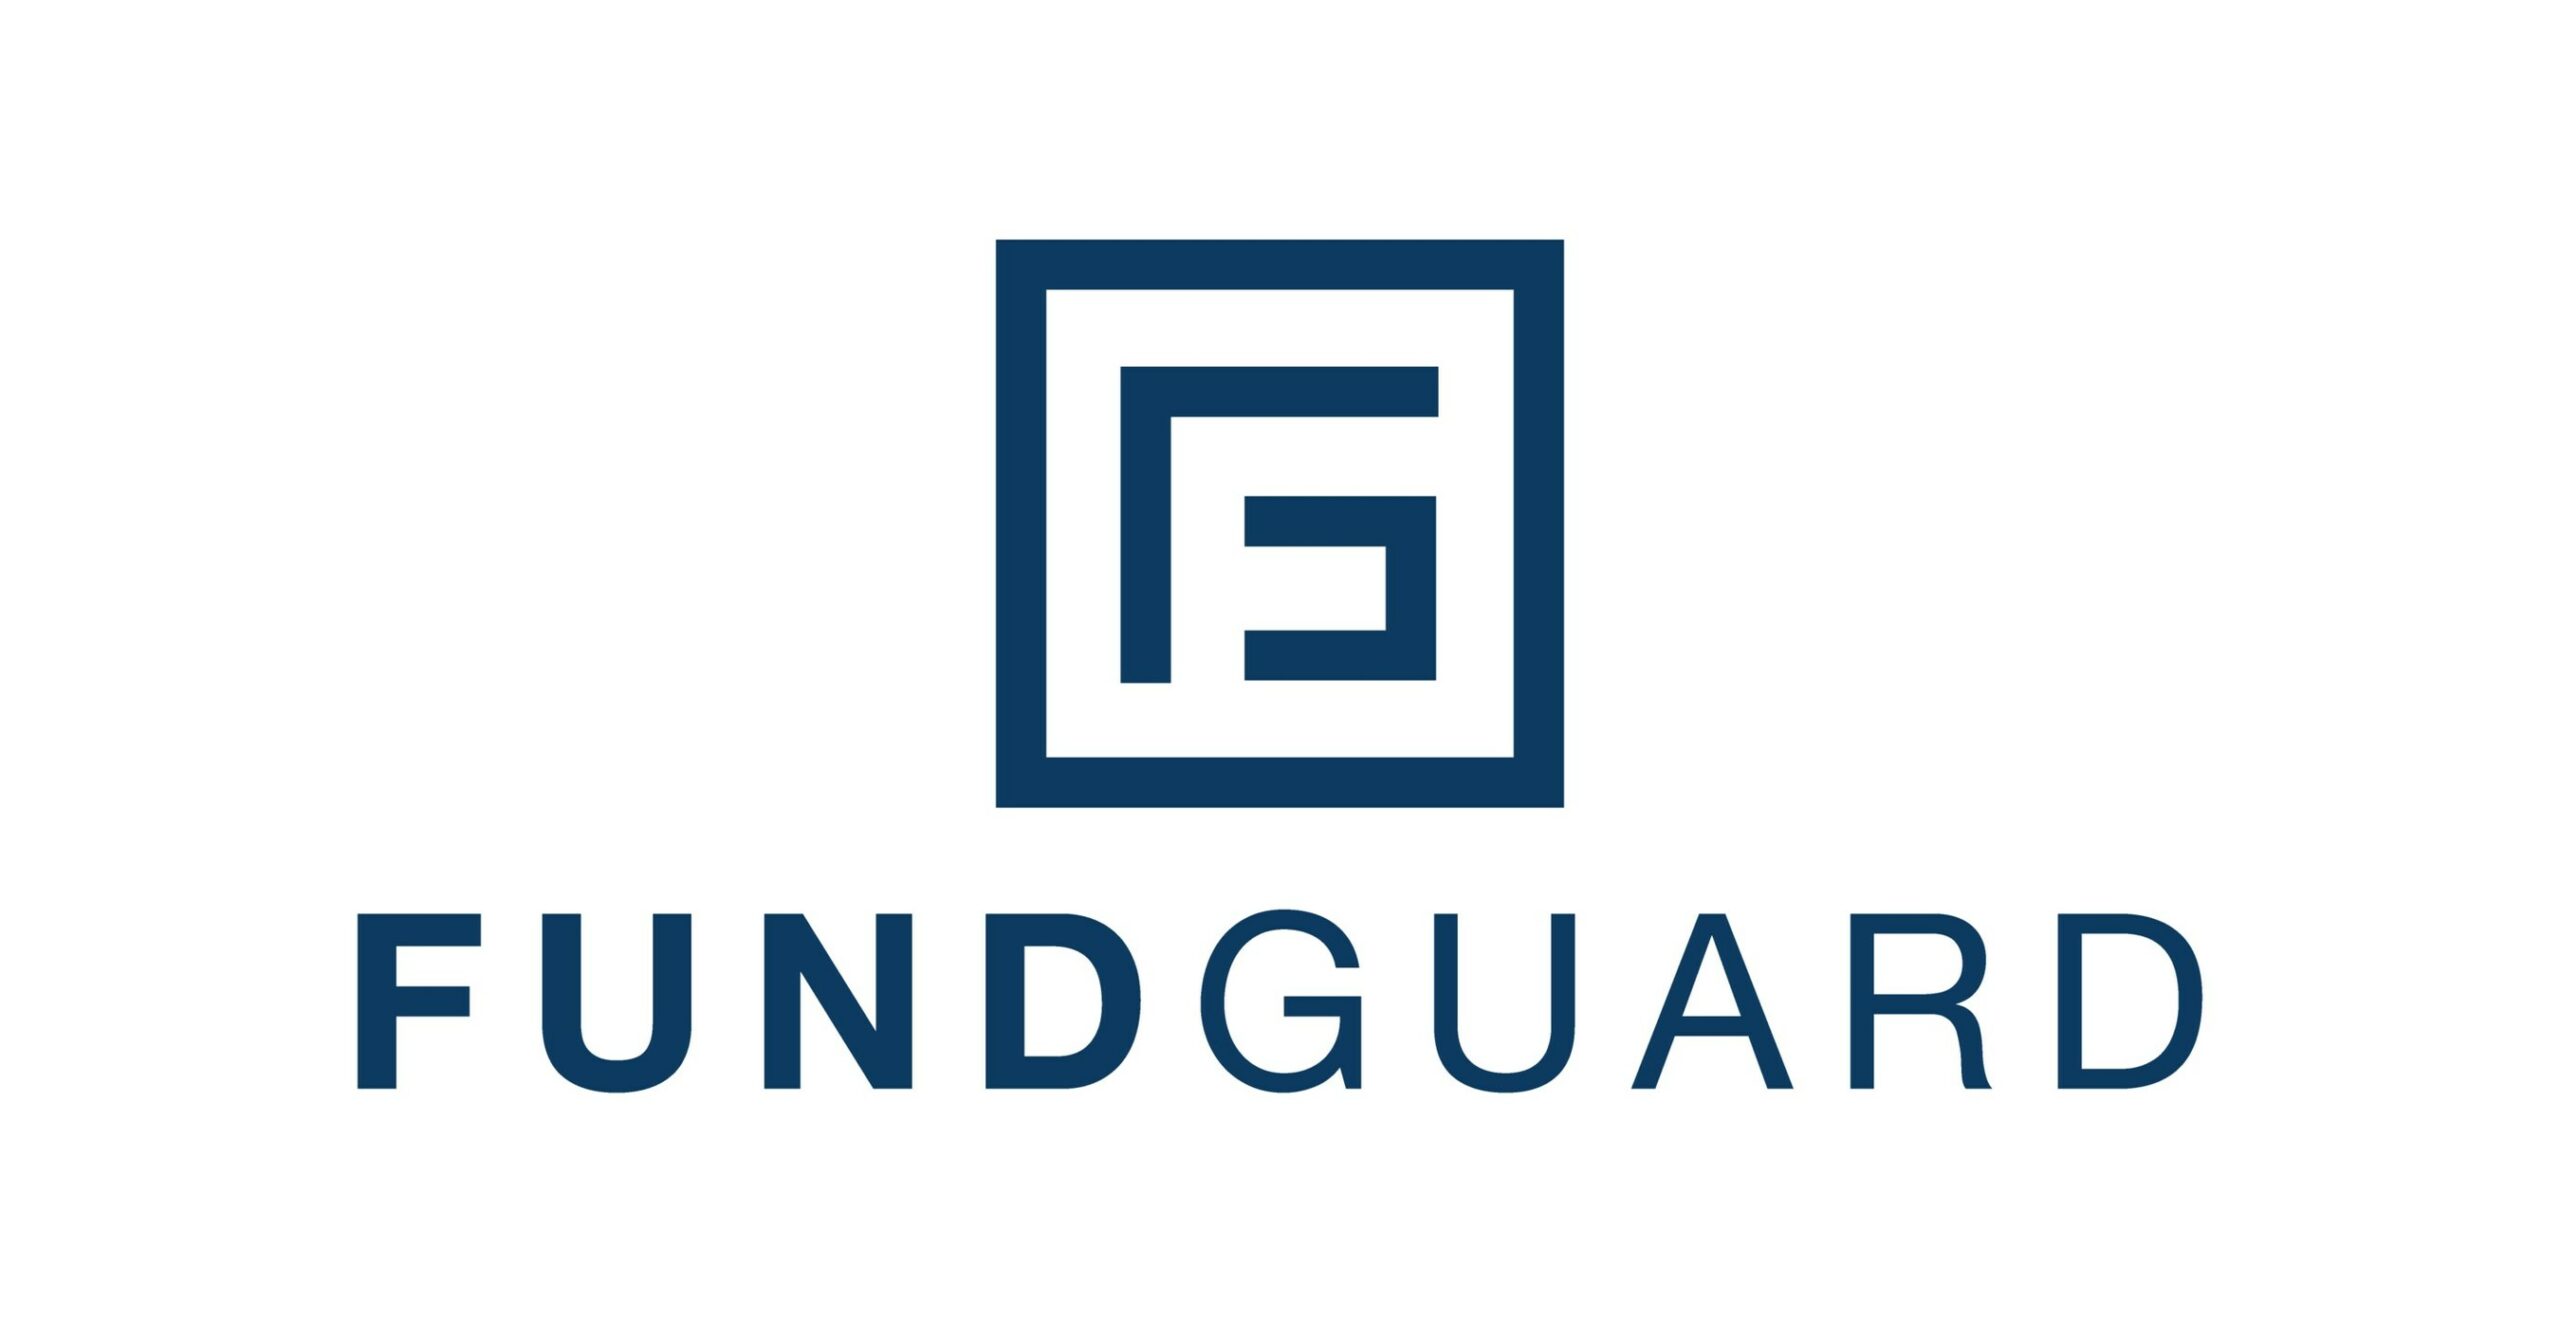 FundGuard is driving a new era of global asset servicing capabilities.